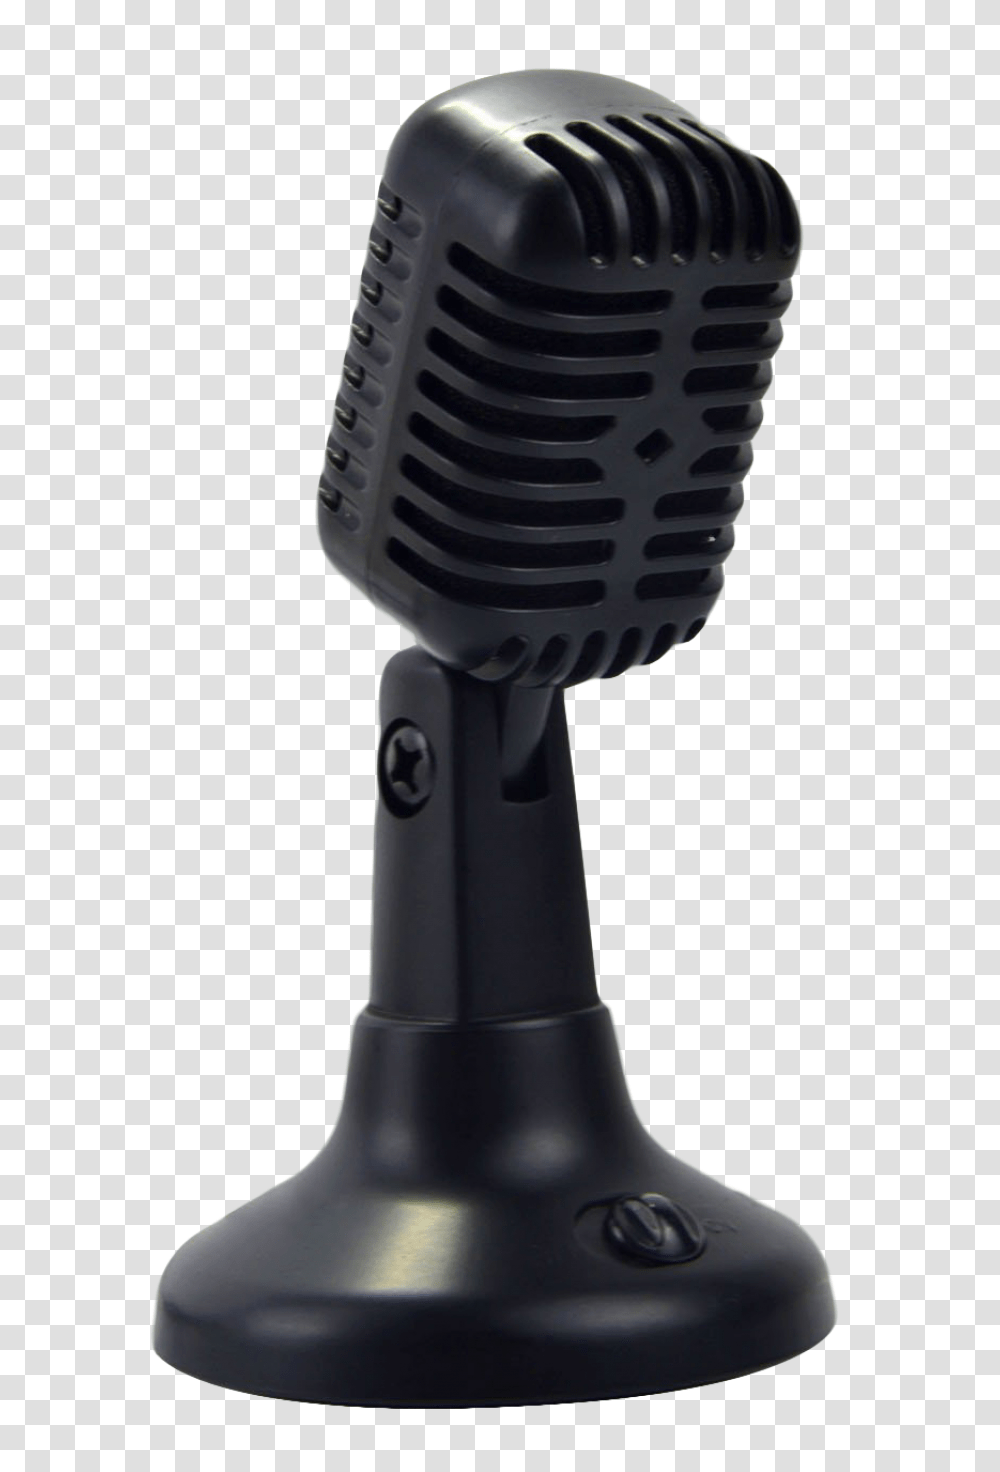 Podcast Microphone Image For Free Download Podcast Mic, Electrical Device Transparent Png